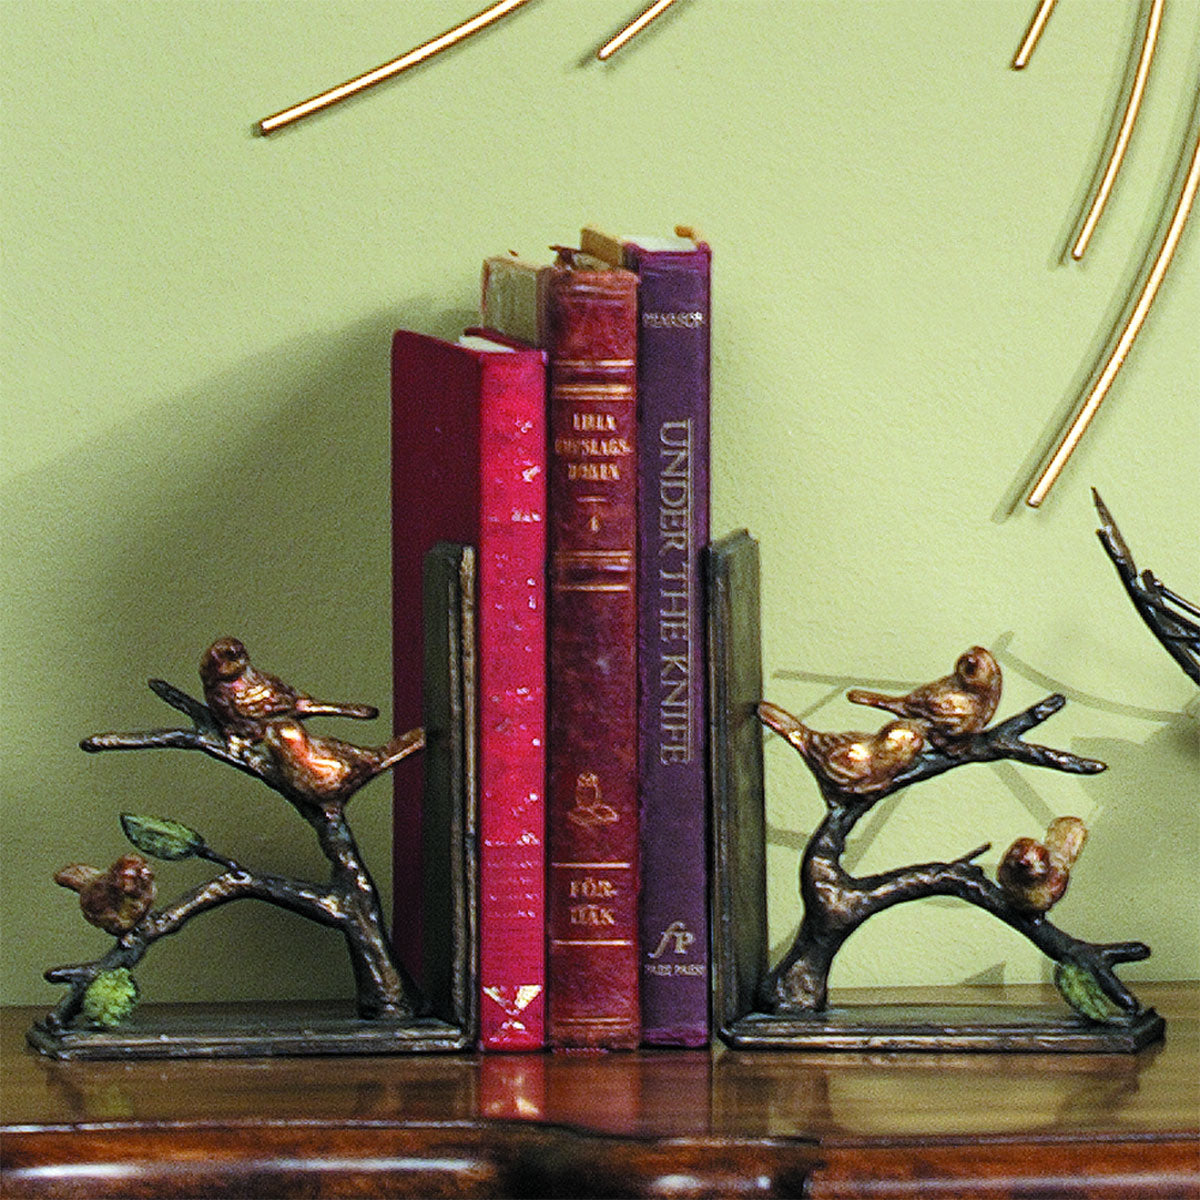 Sparrow Bookends (Pair)